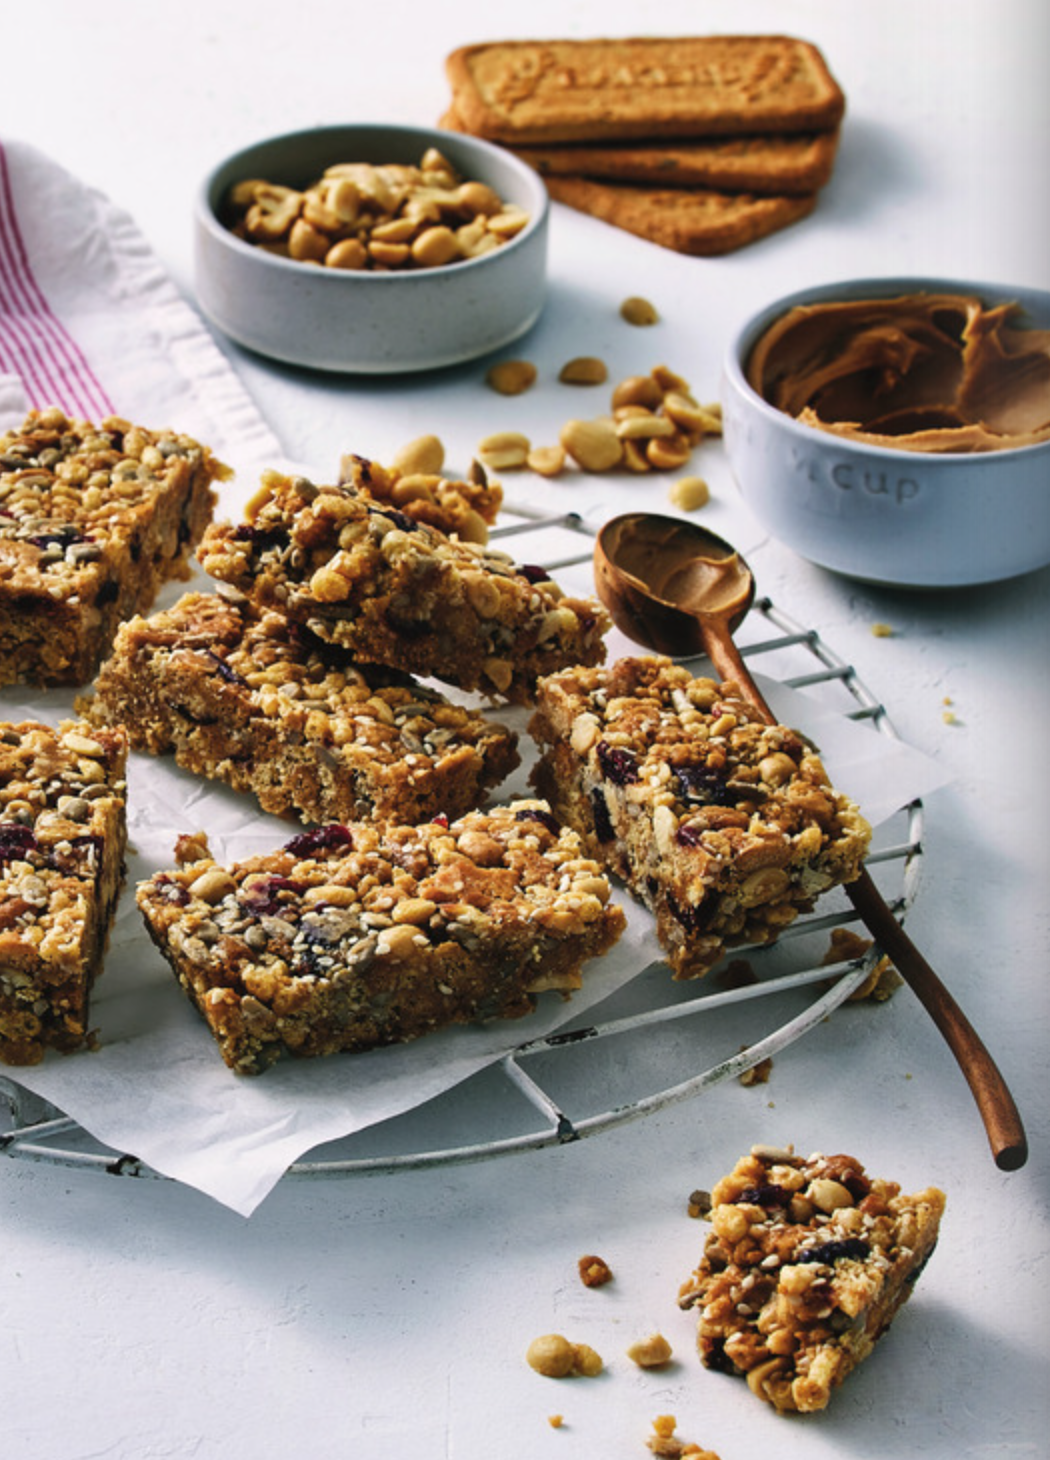 Biscuits, Nut & Seed Bars with Good Morning Biscuits